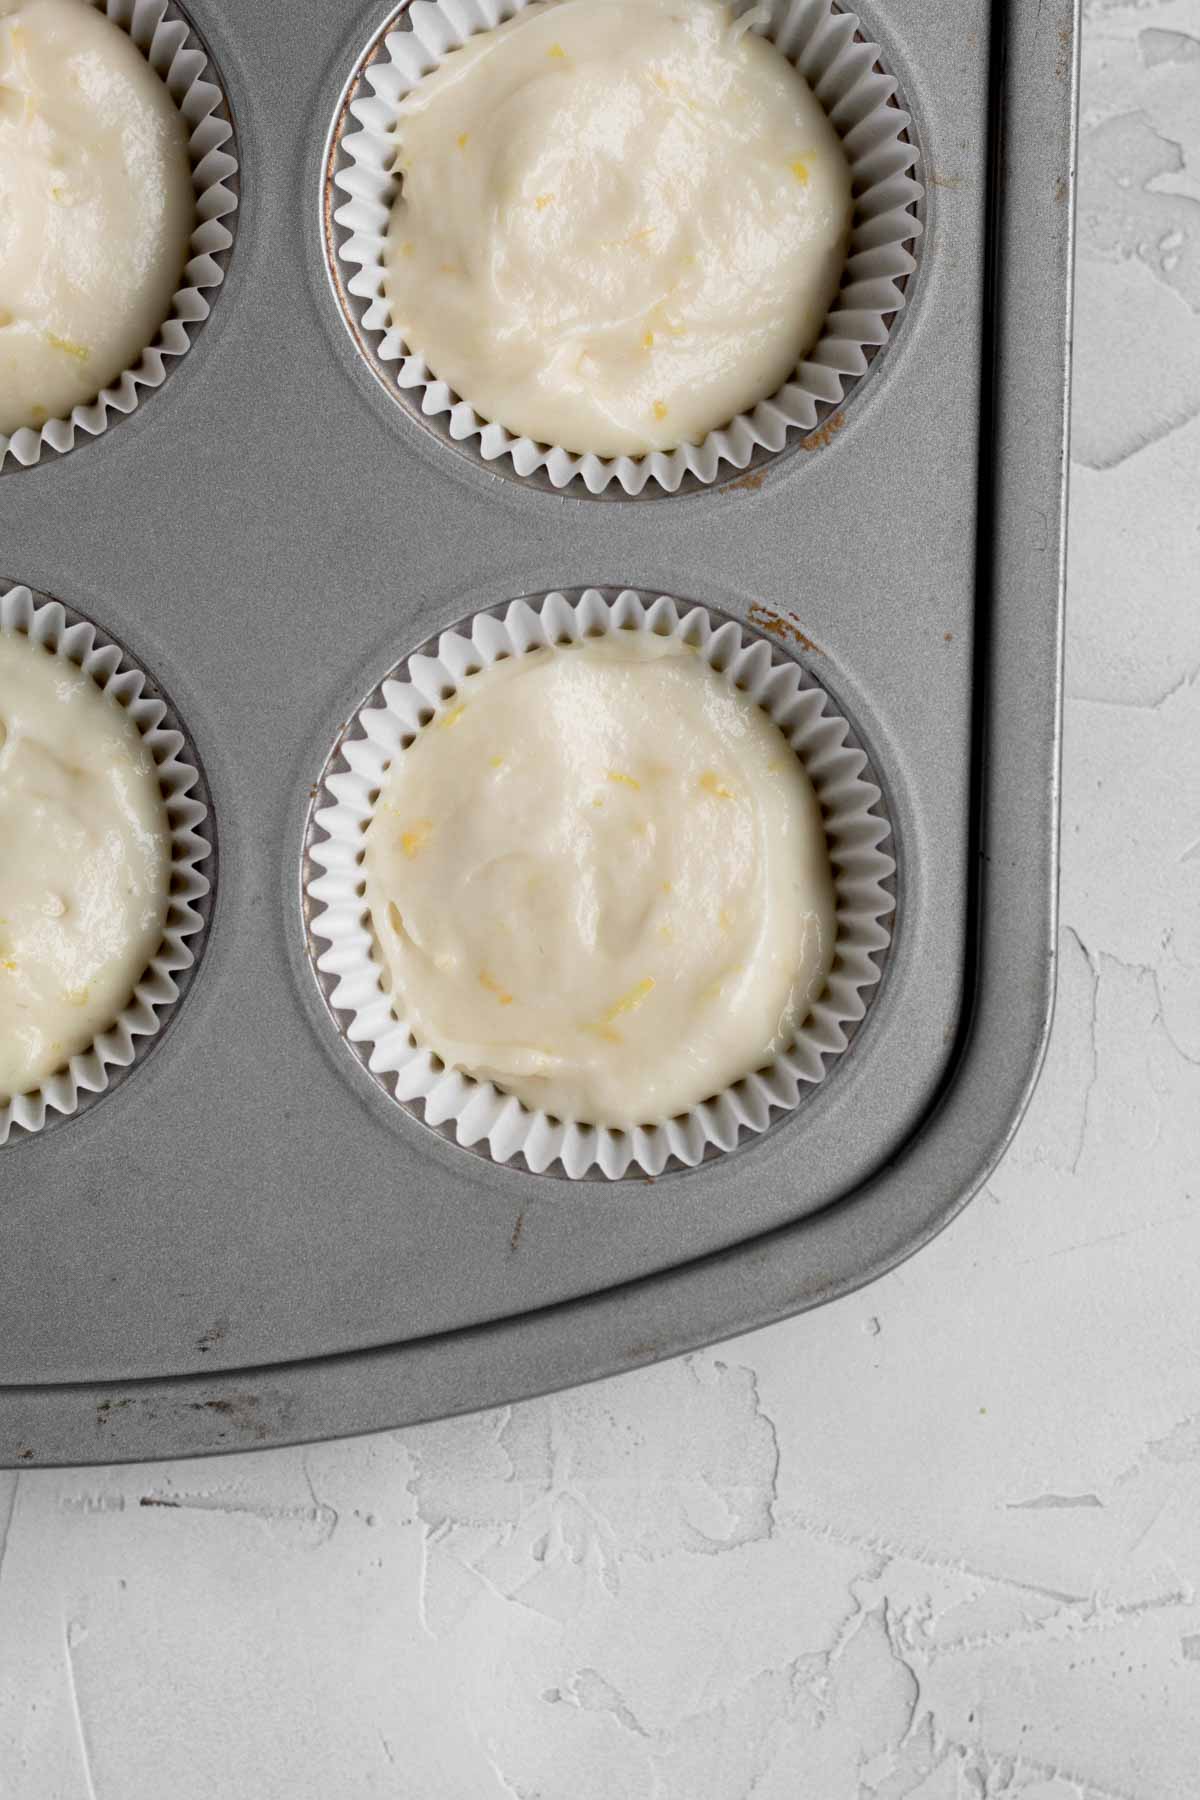 Filling a cupcake tin with wrappers and the batter.